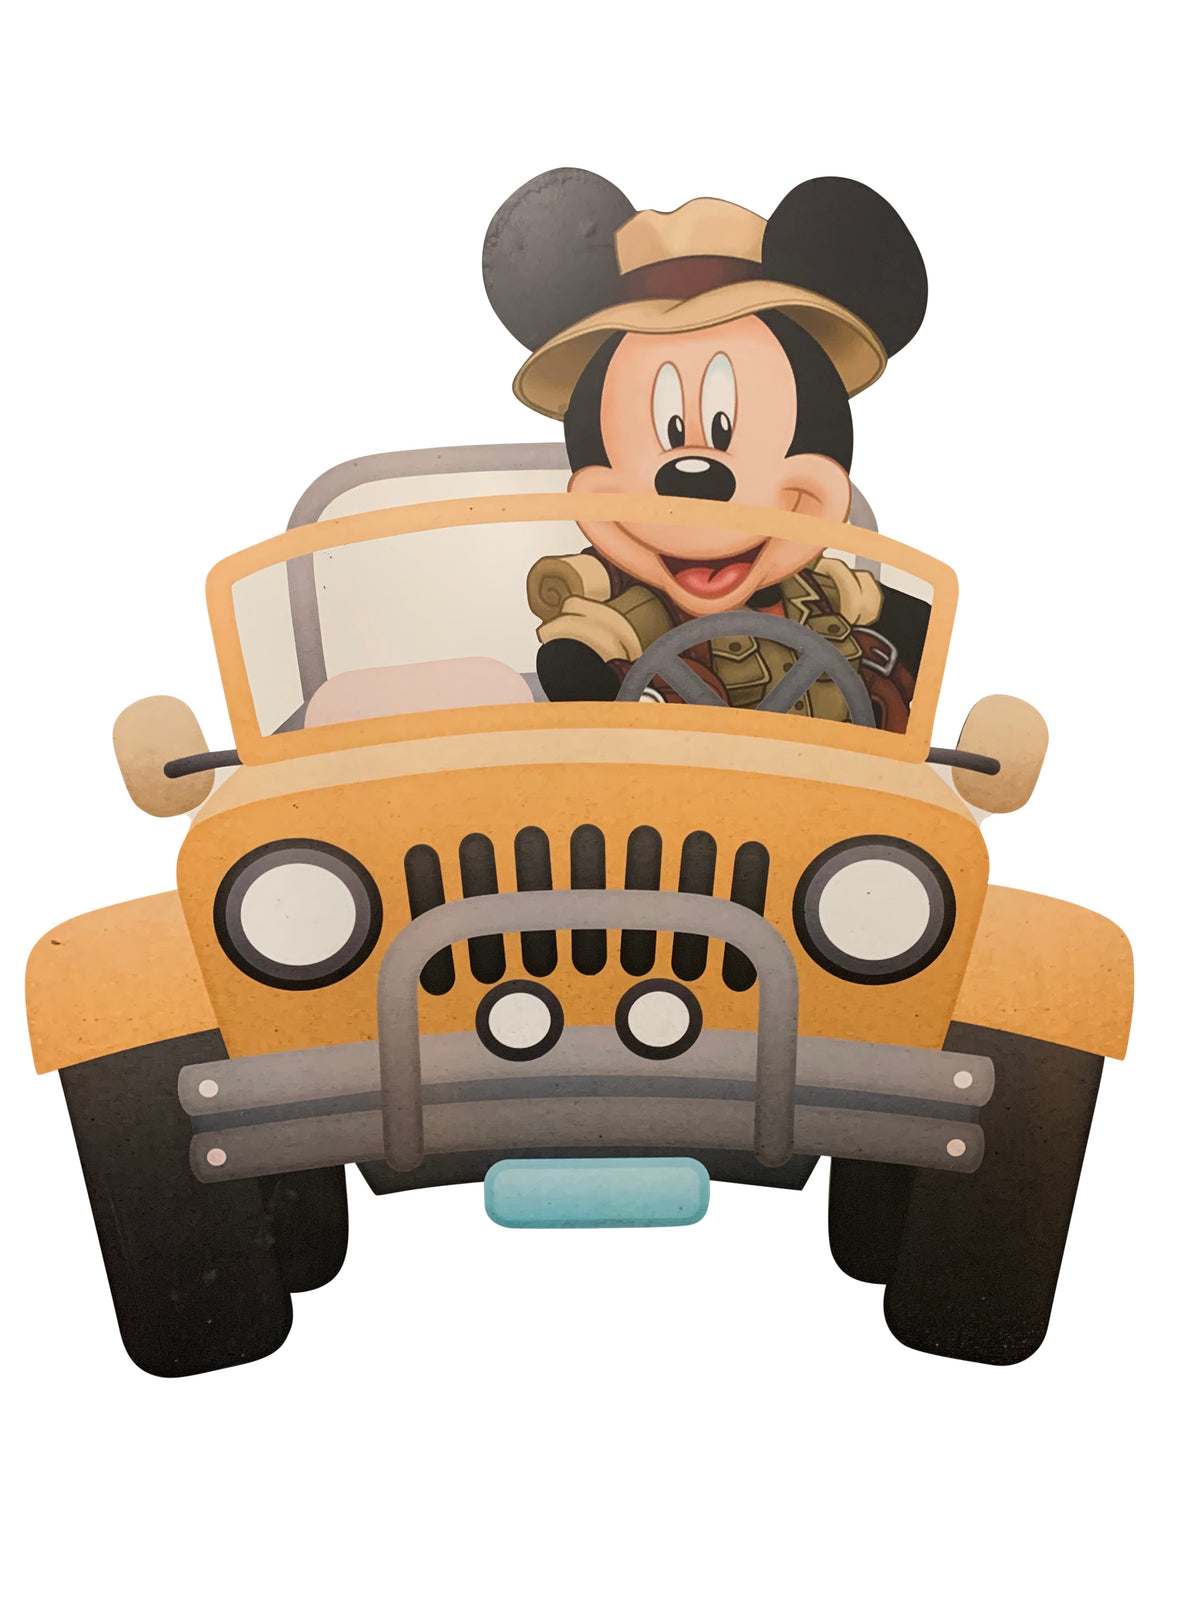 mickey mouse jeep